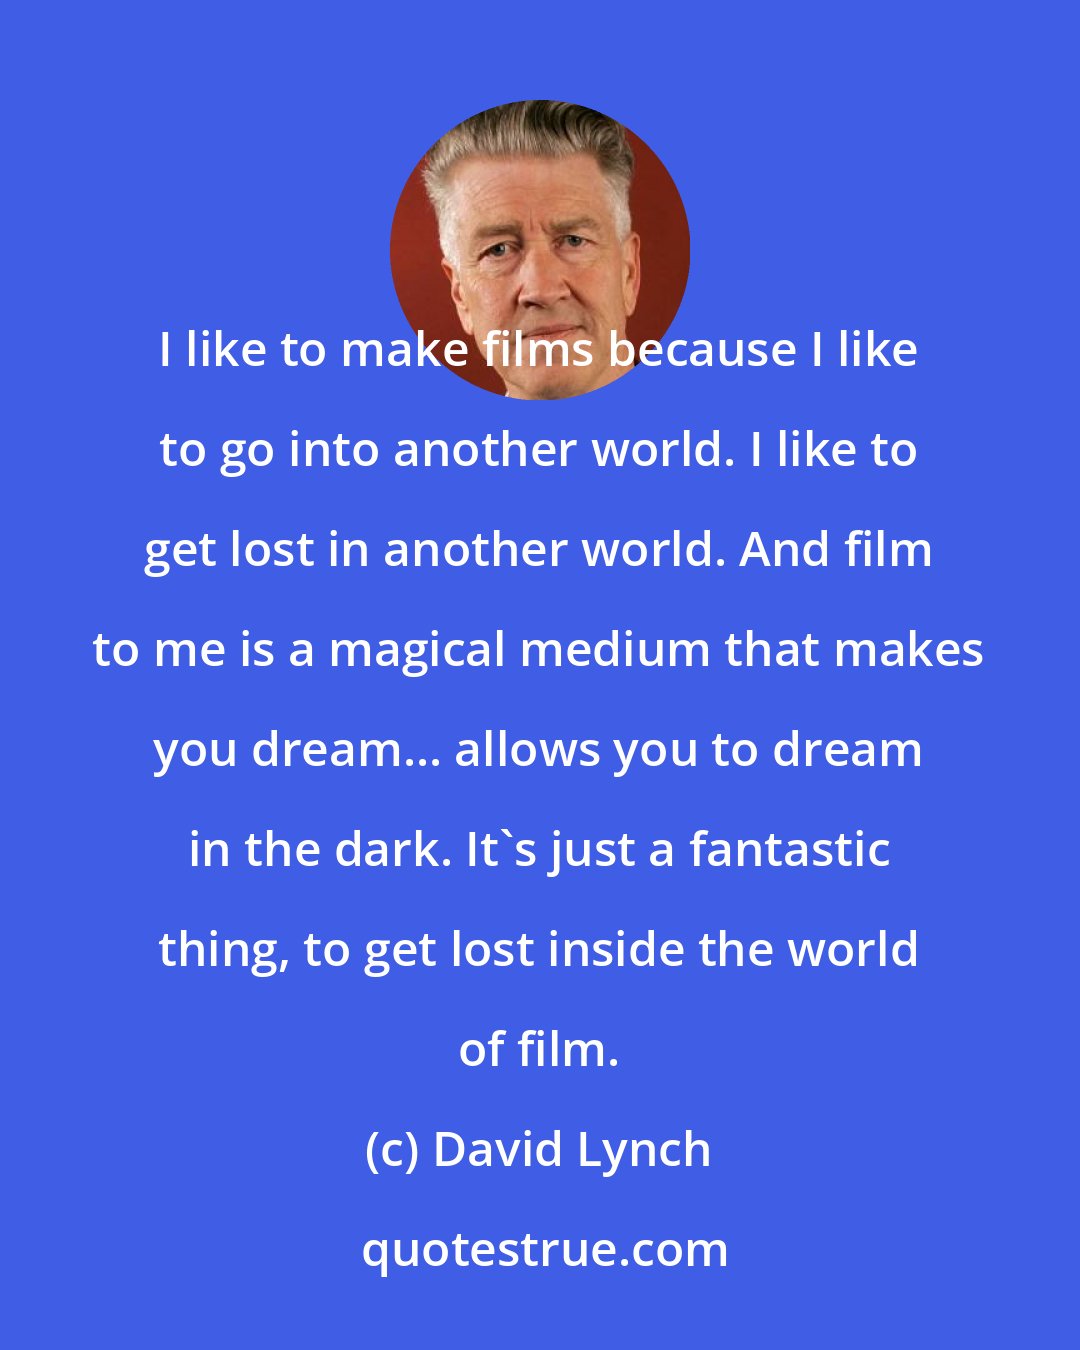 David Lynch: I like to make films because I like to go into another world. I like to get lost in another world. And film to me is a magical medium that makes you dream... allows you to dream in the dark. It's just a fantastic thing, to get lost inside the world of film.